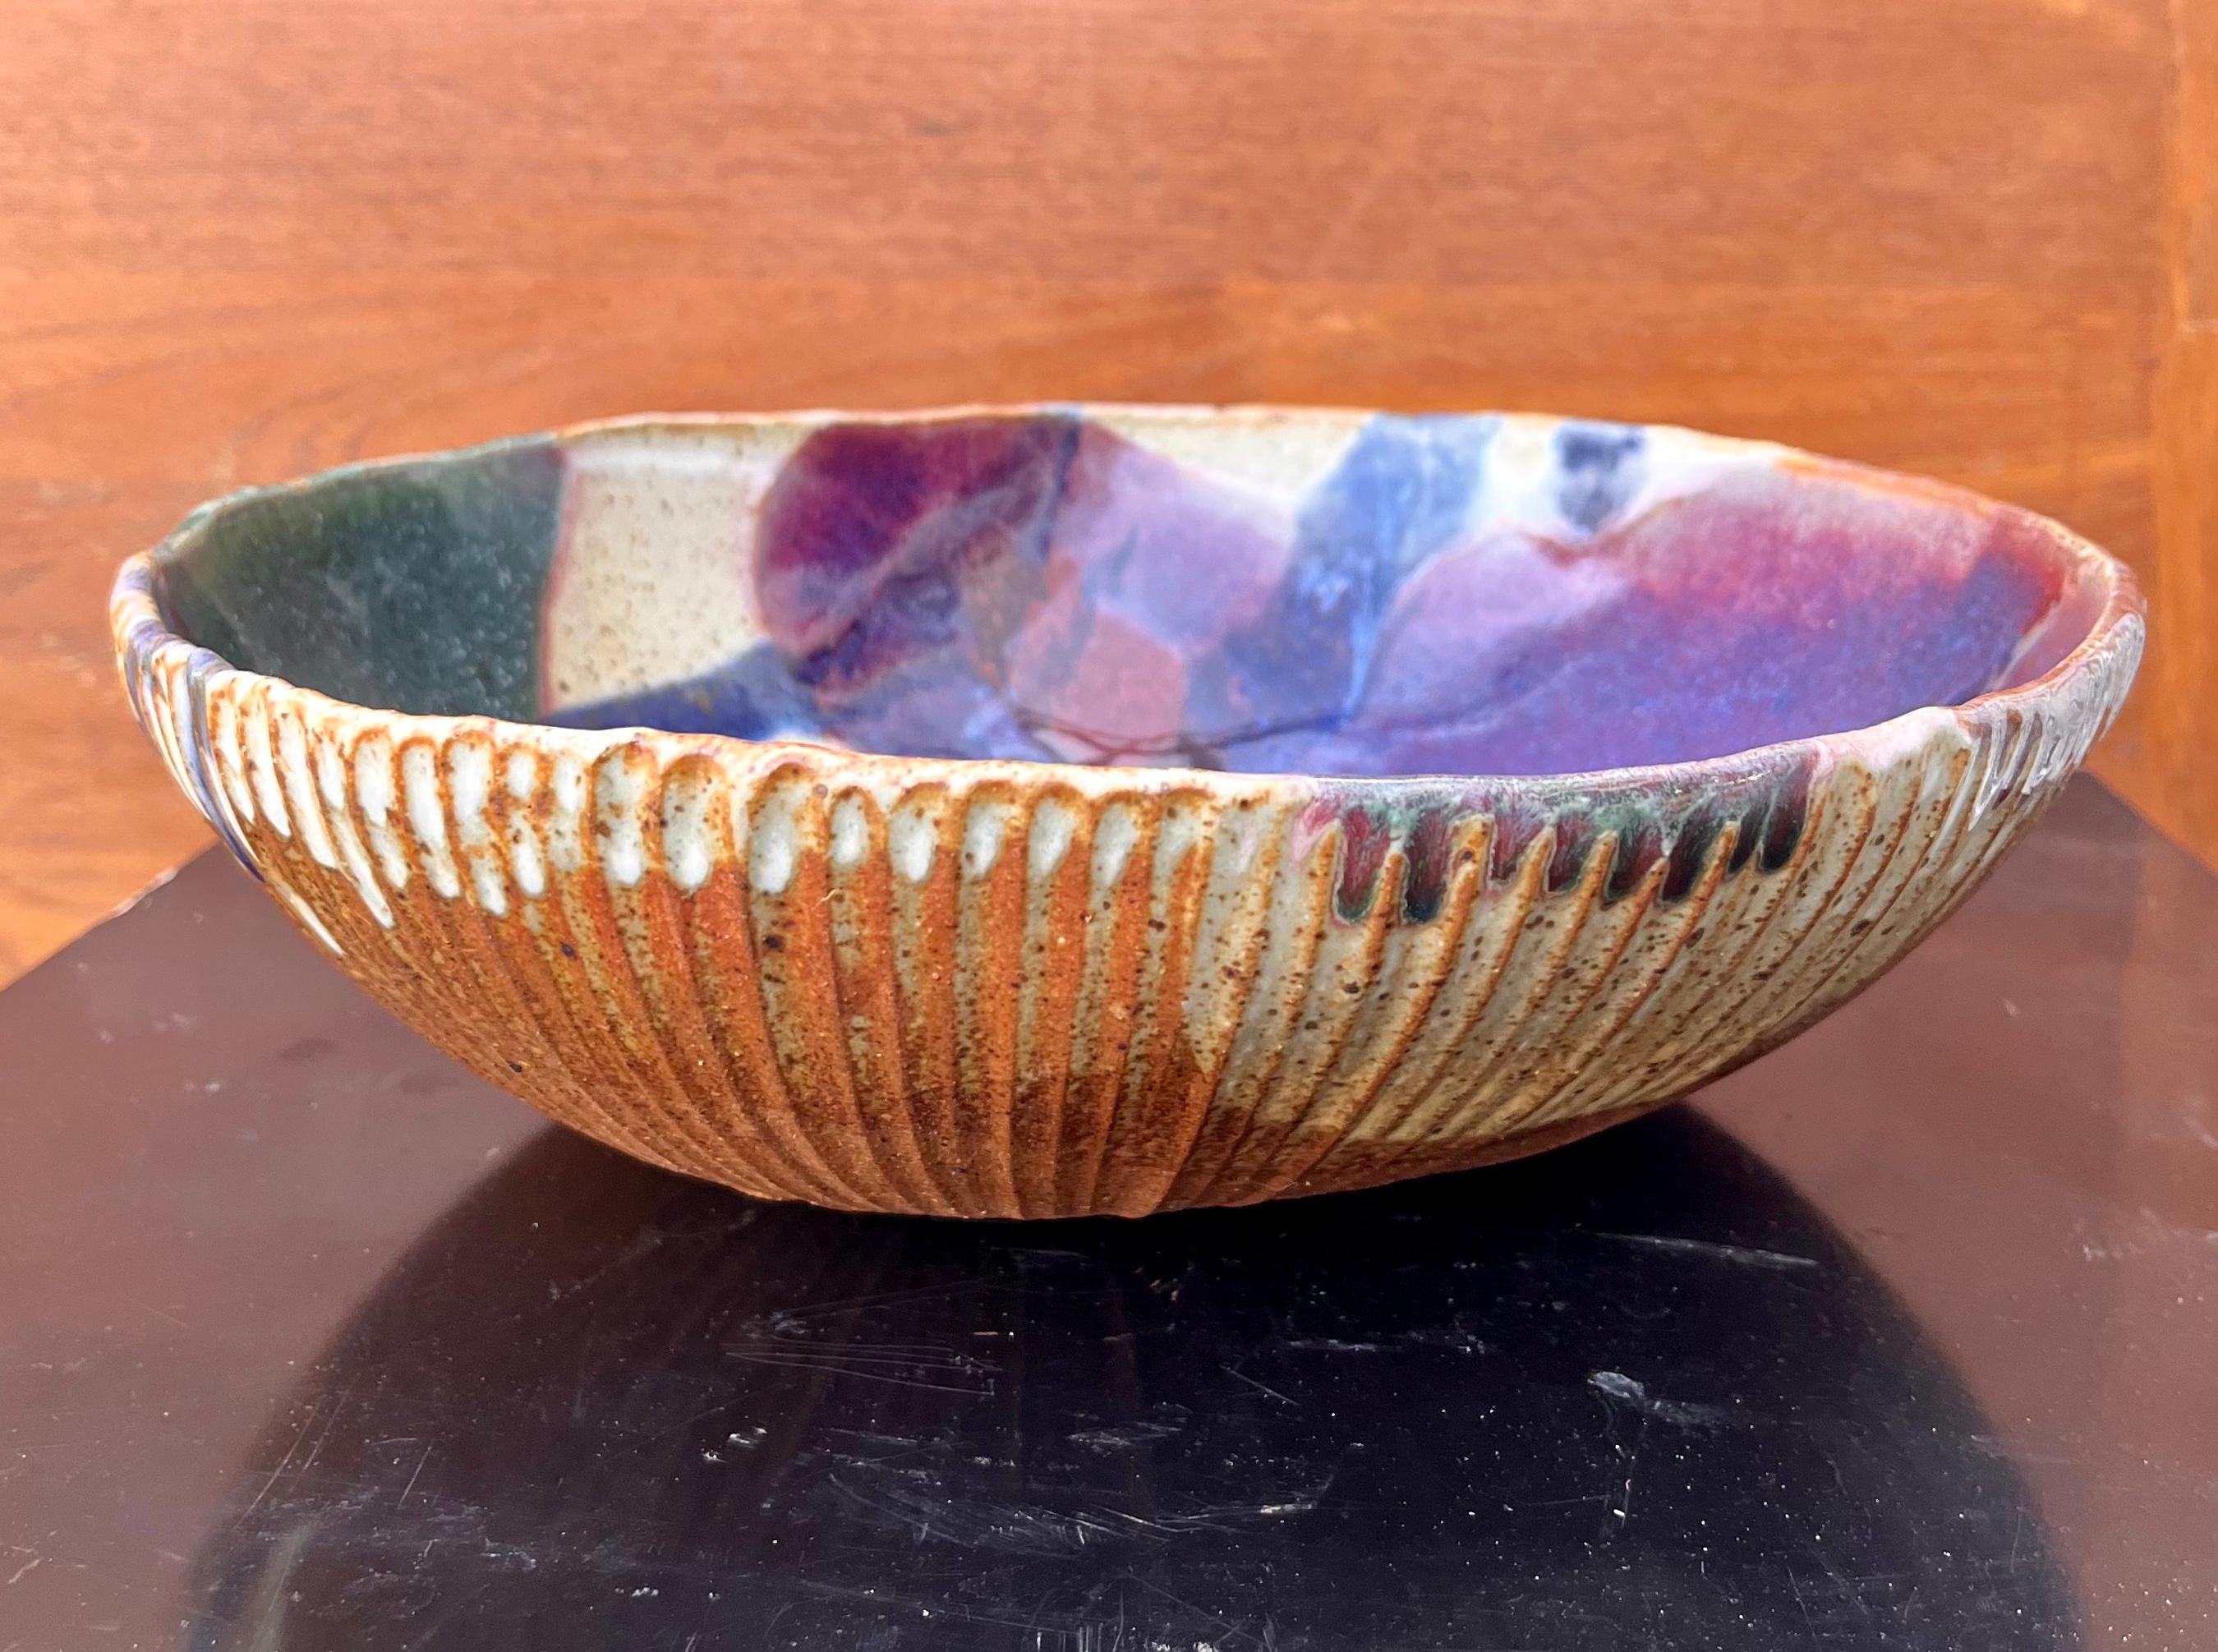 Vintage Mid Century Modern Ceramic Studio Signed Stamped Pottery Bowl. Circa 1960s 
Features a brutalist inspired design with an incised raw partially glazed exterior and an abstract patterned interior in purple, hunter green, magenta, and cobalt